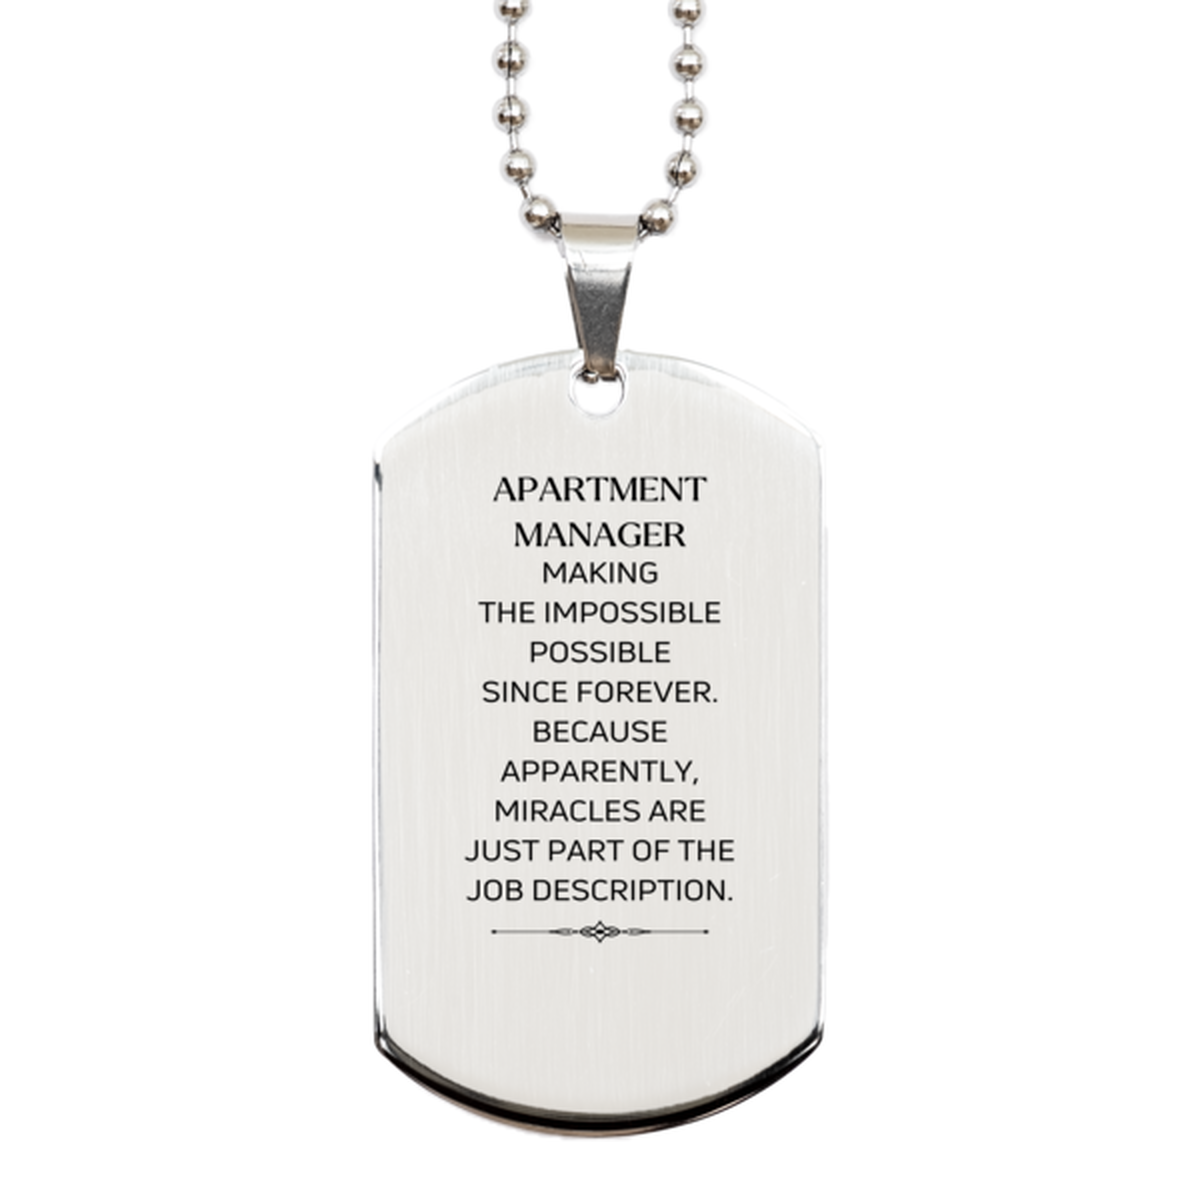 Funny Apartment Manager Gifts, Miracles are just part of the job description, Inspirational Birthday Silver Dog Tag For Apartment Manager, Men, Women, Coworkers, Friends, Boss